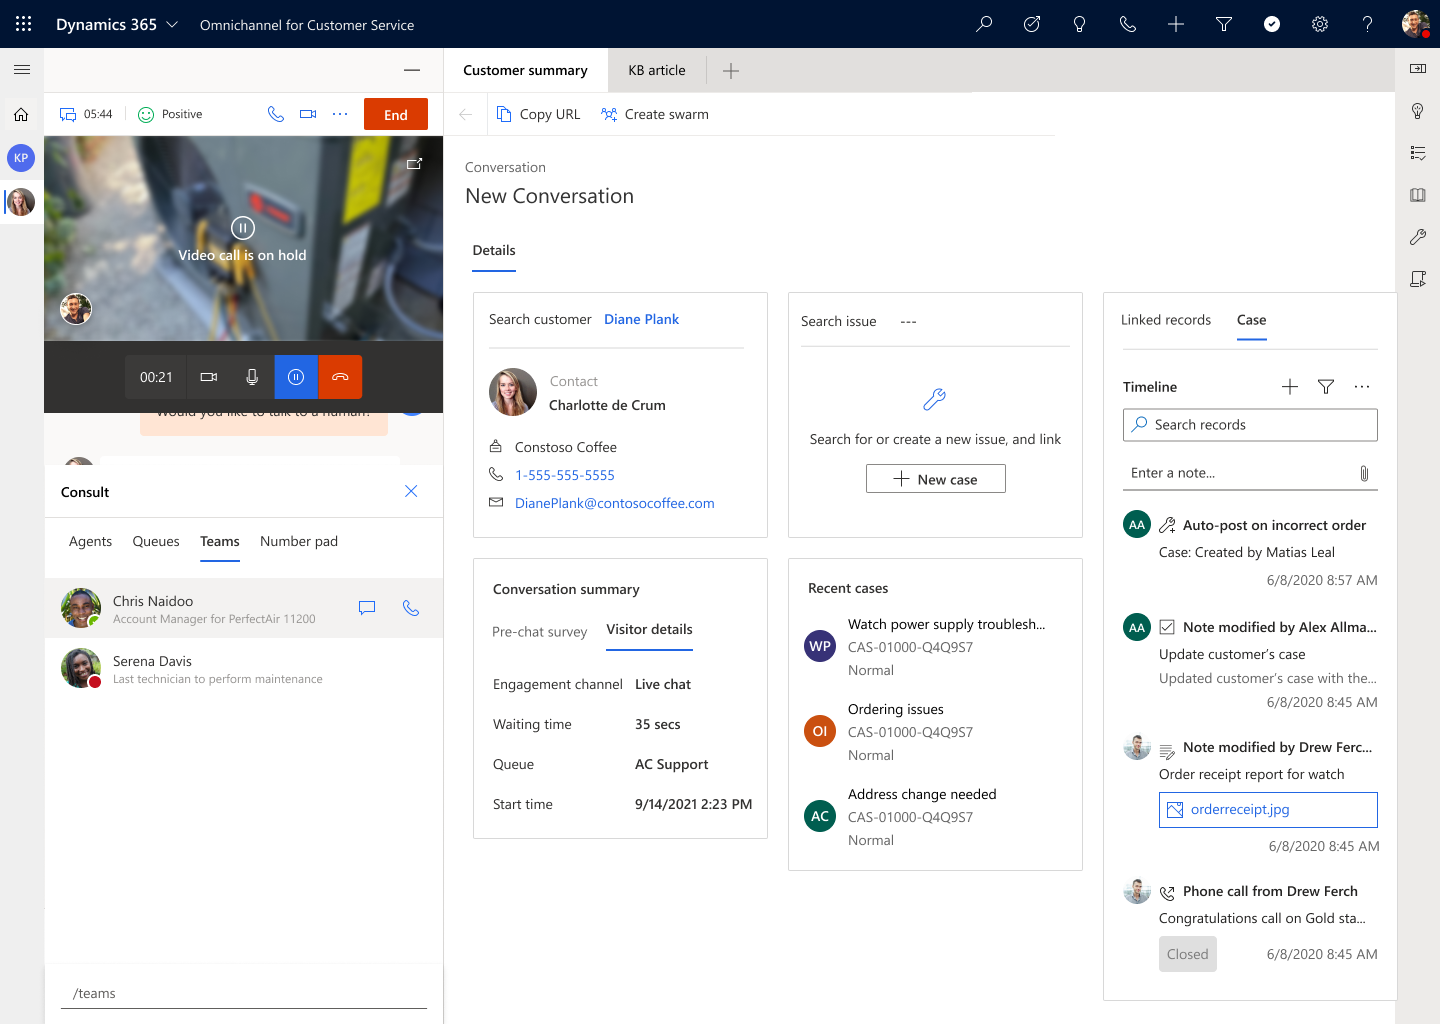 Microsoft expands Dynamics 365 Customer Service to an all-in-one digital contact center solution leveraging the power of Microsoft Teams.